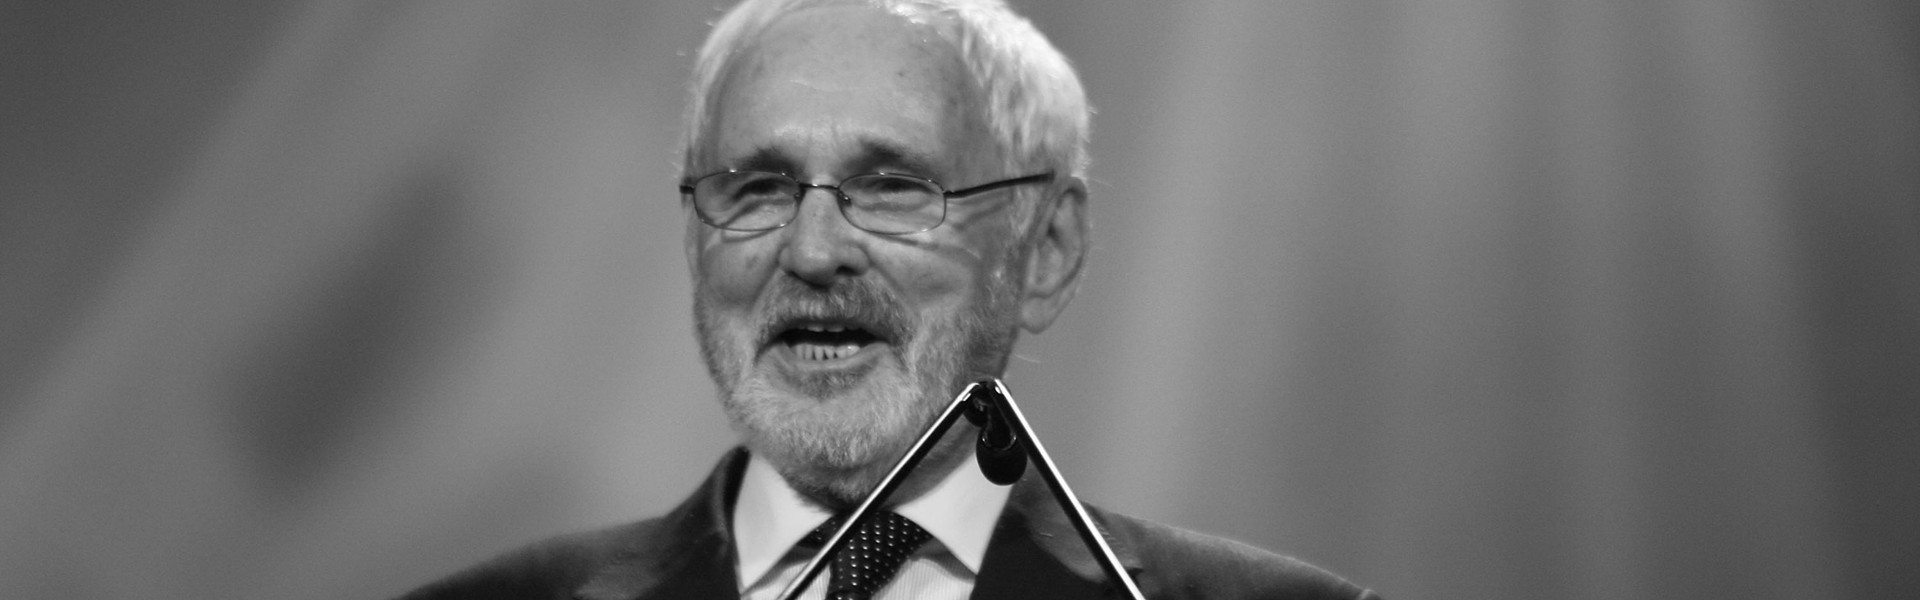 Norman Jewison, an icon of directing (“Fiddler on the Roof,” “In the Heat of the Night”), has passed away